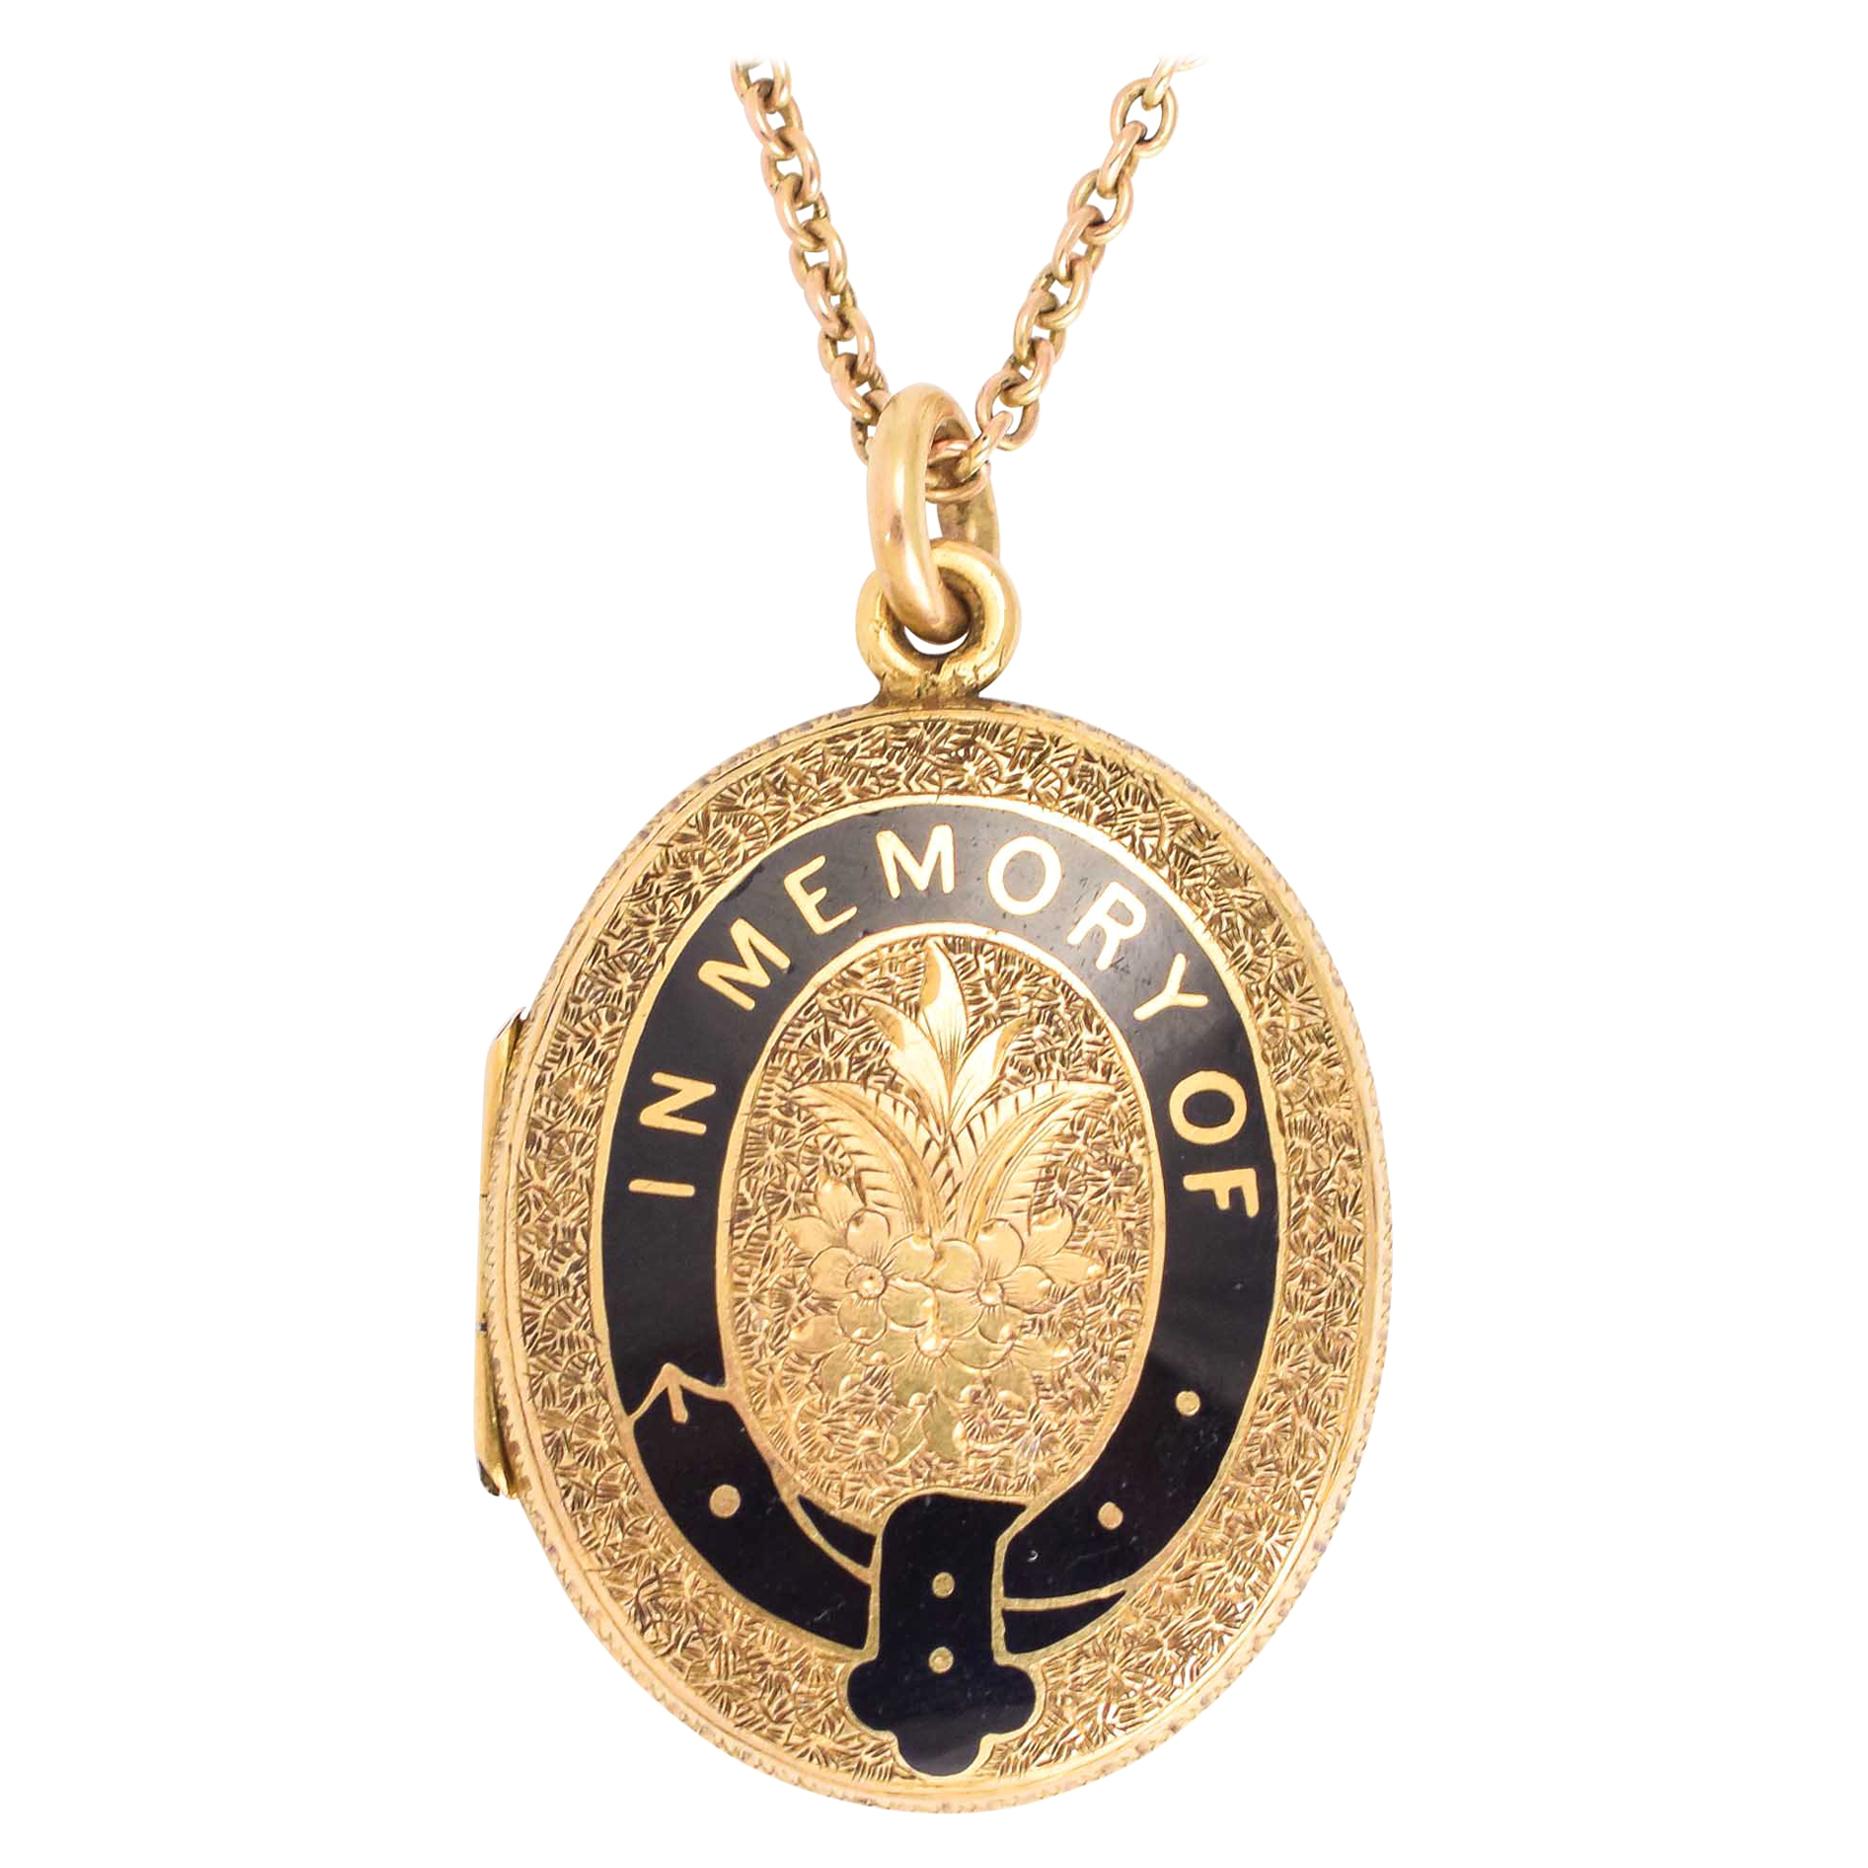 Antique Victorian in Memory of Oval Mourning Locket